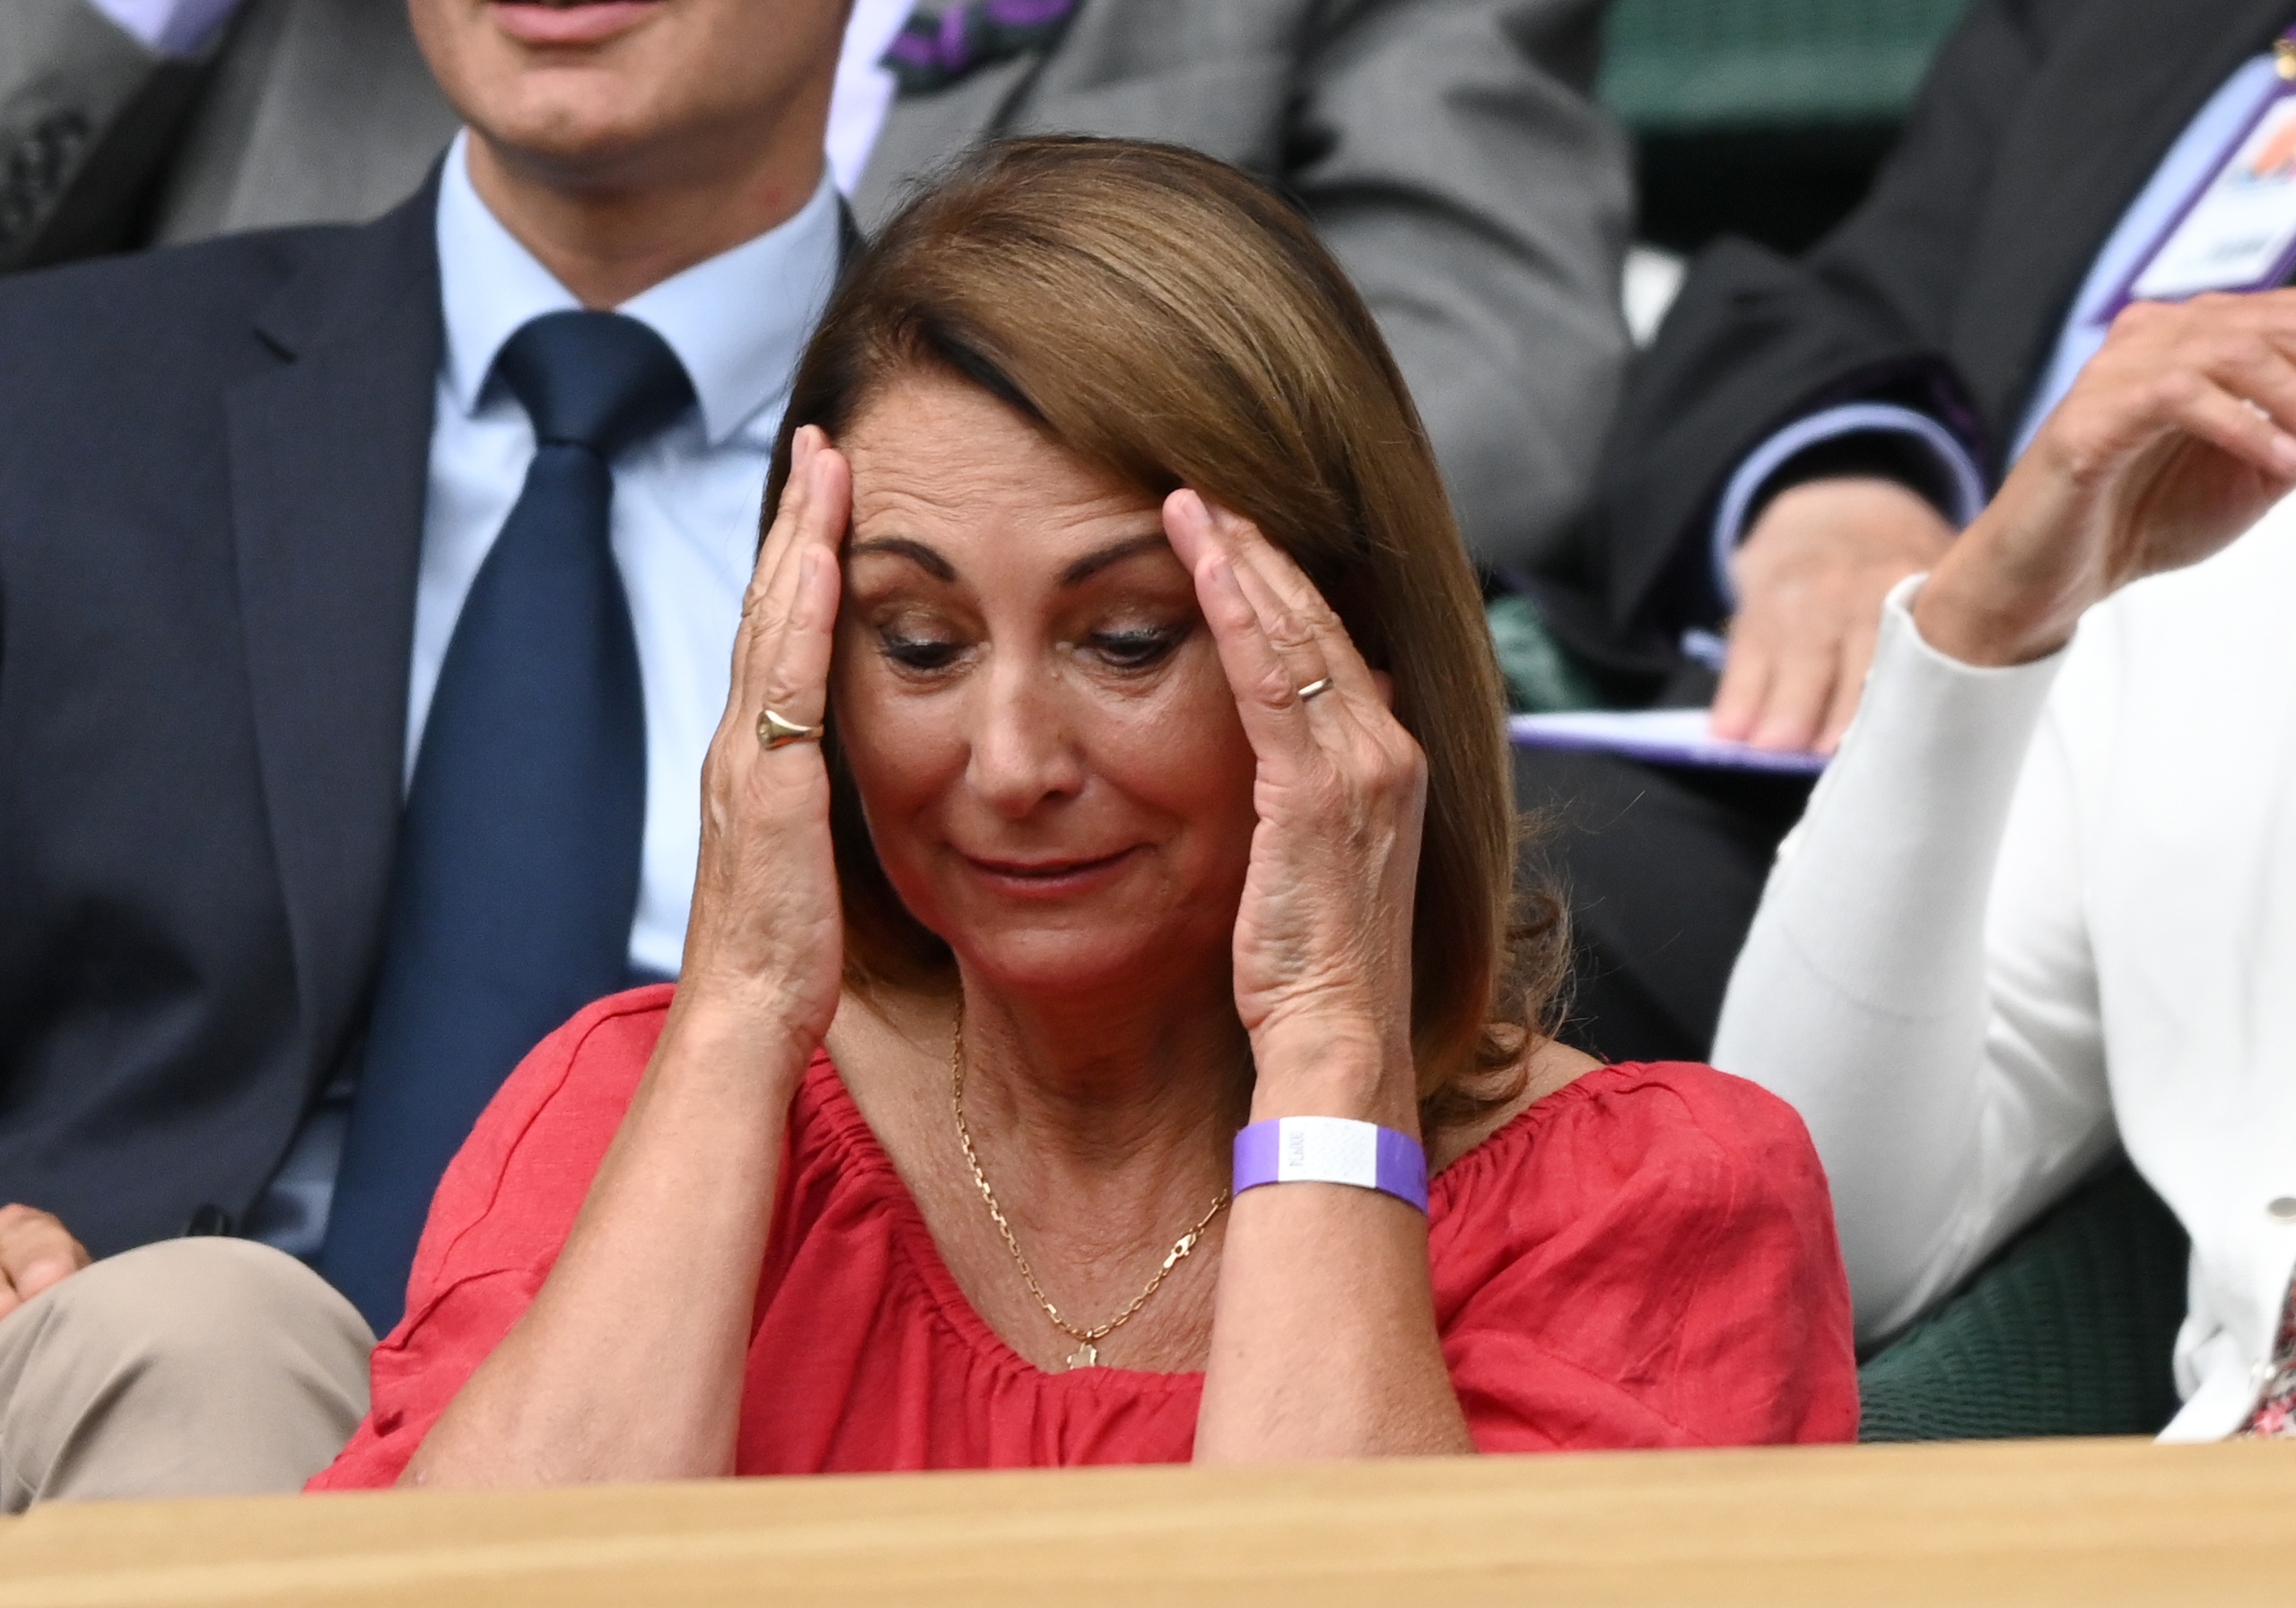 Carole Middleton at the Wimbledon Tennis Championships in London, England on July 9, 2021 | Source: Getty Images